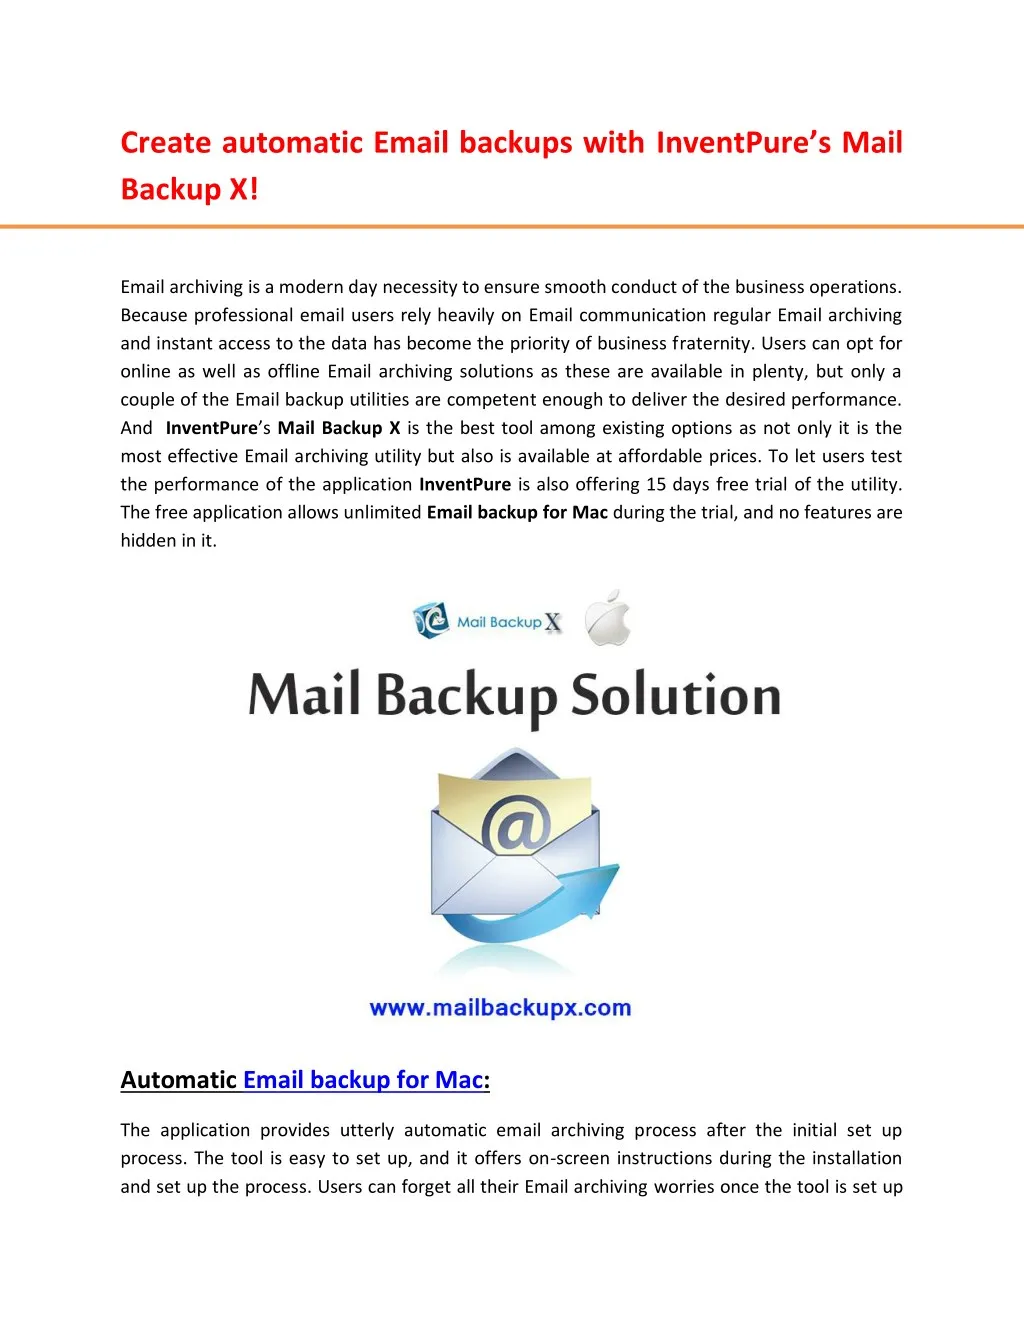 create automatic email backups with inventpure